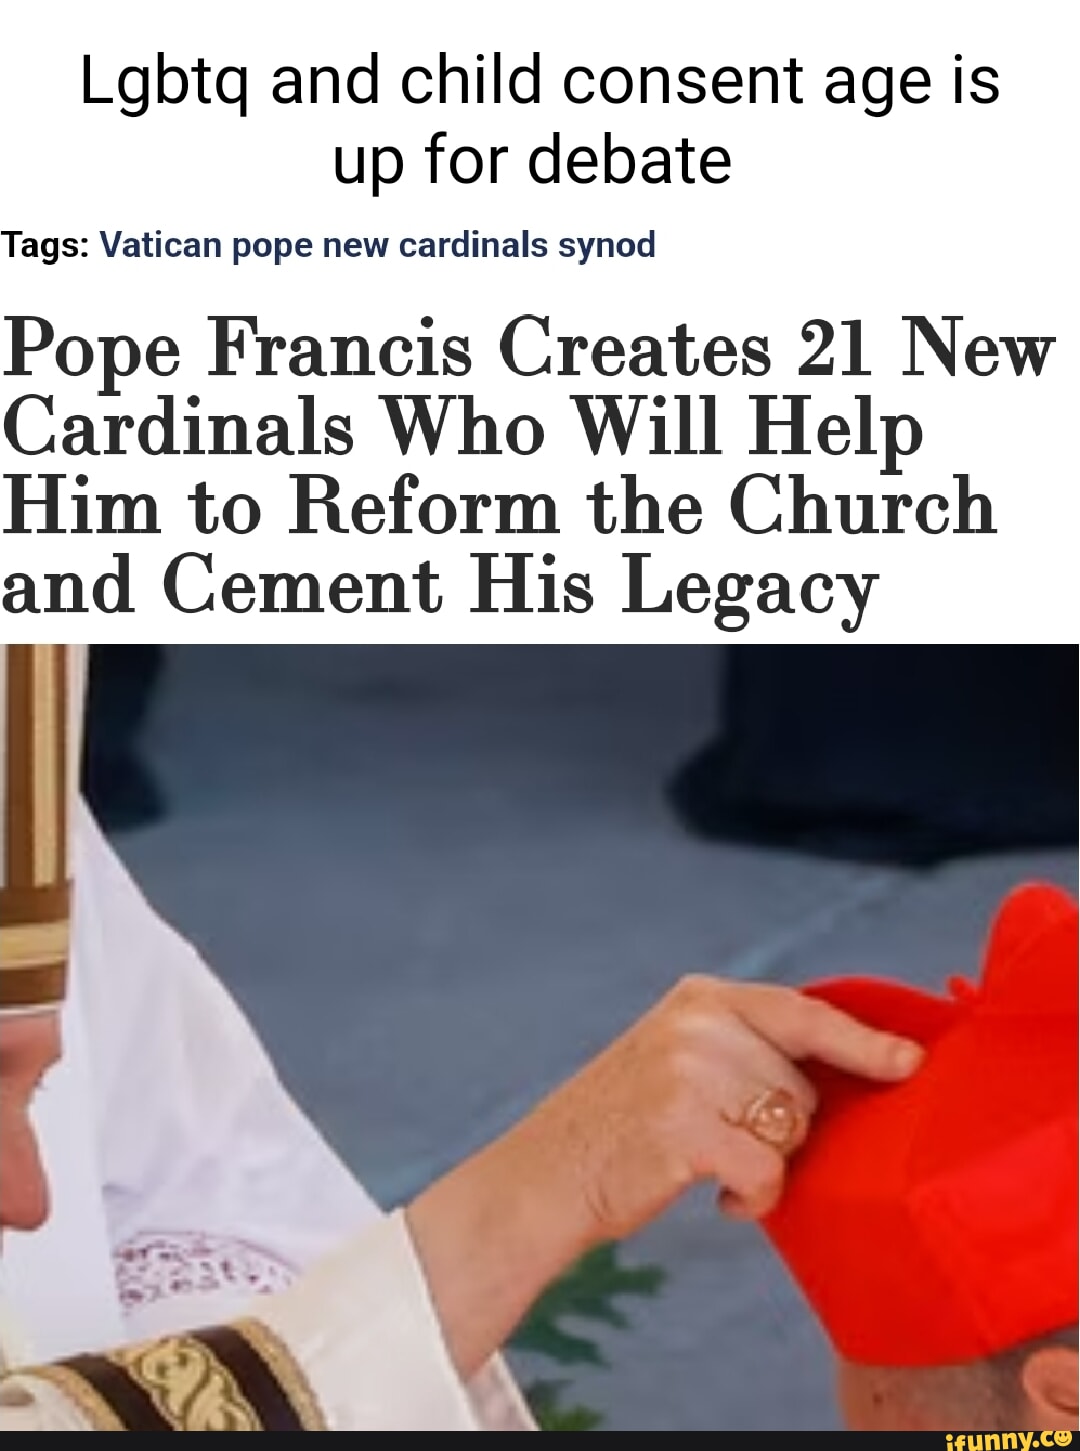 Pope Francis Creates 21 New Cardinals to Help Reform Church